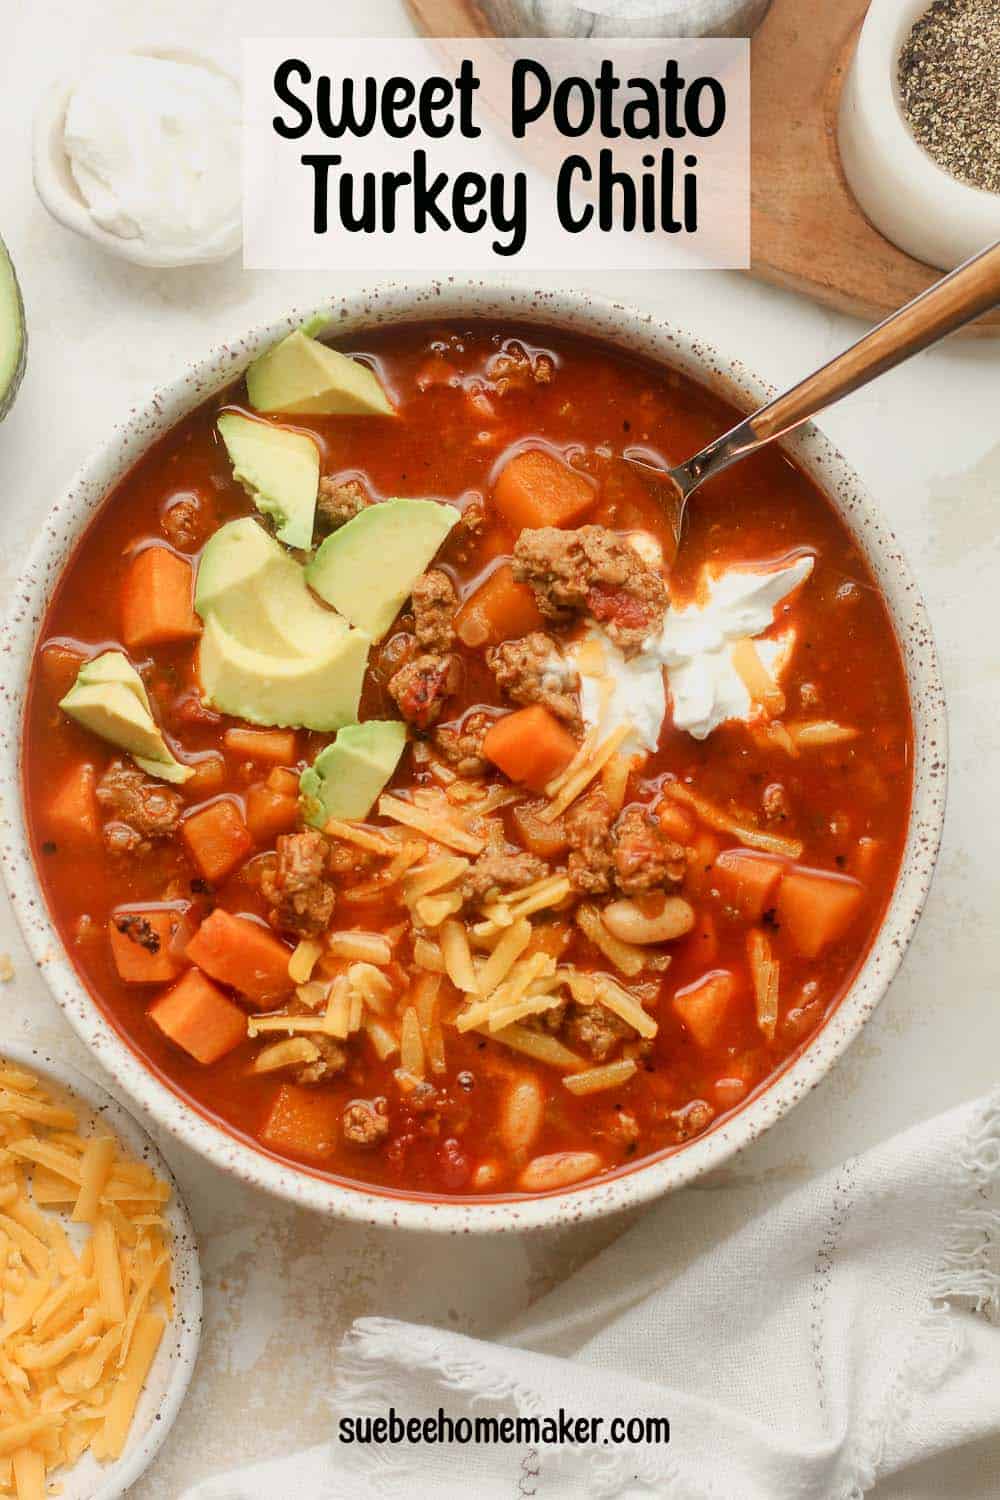 A bowl of sweet potato turkey chili with toppings.